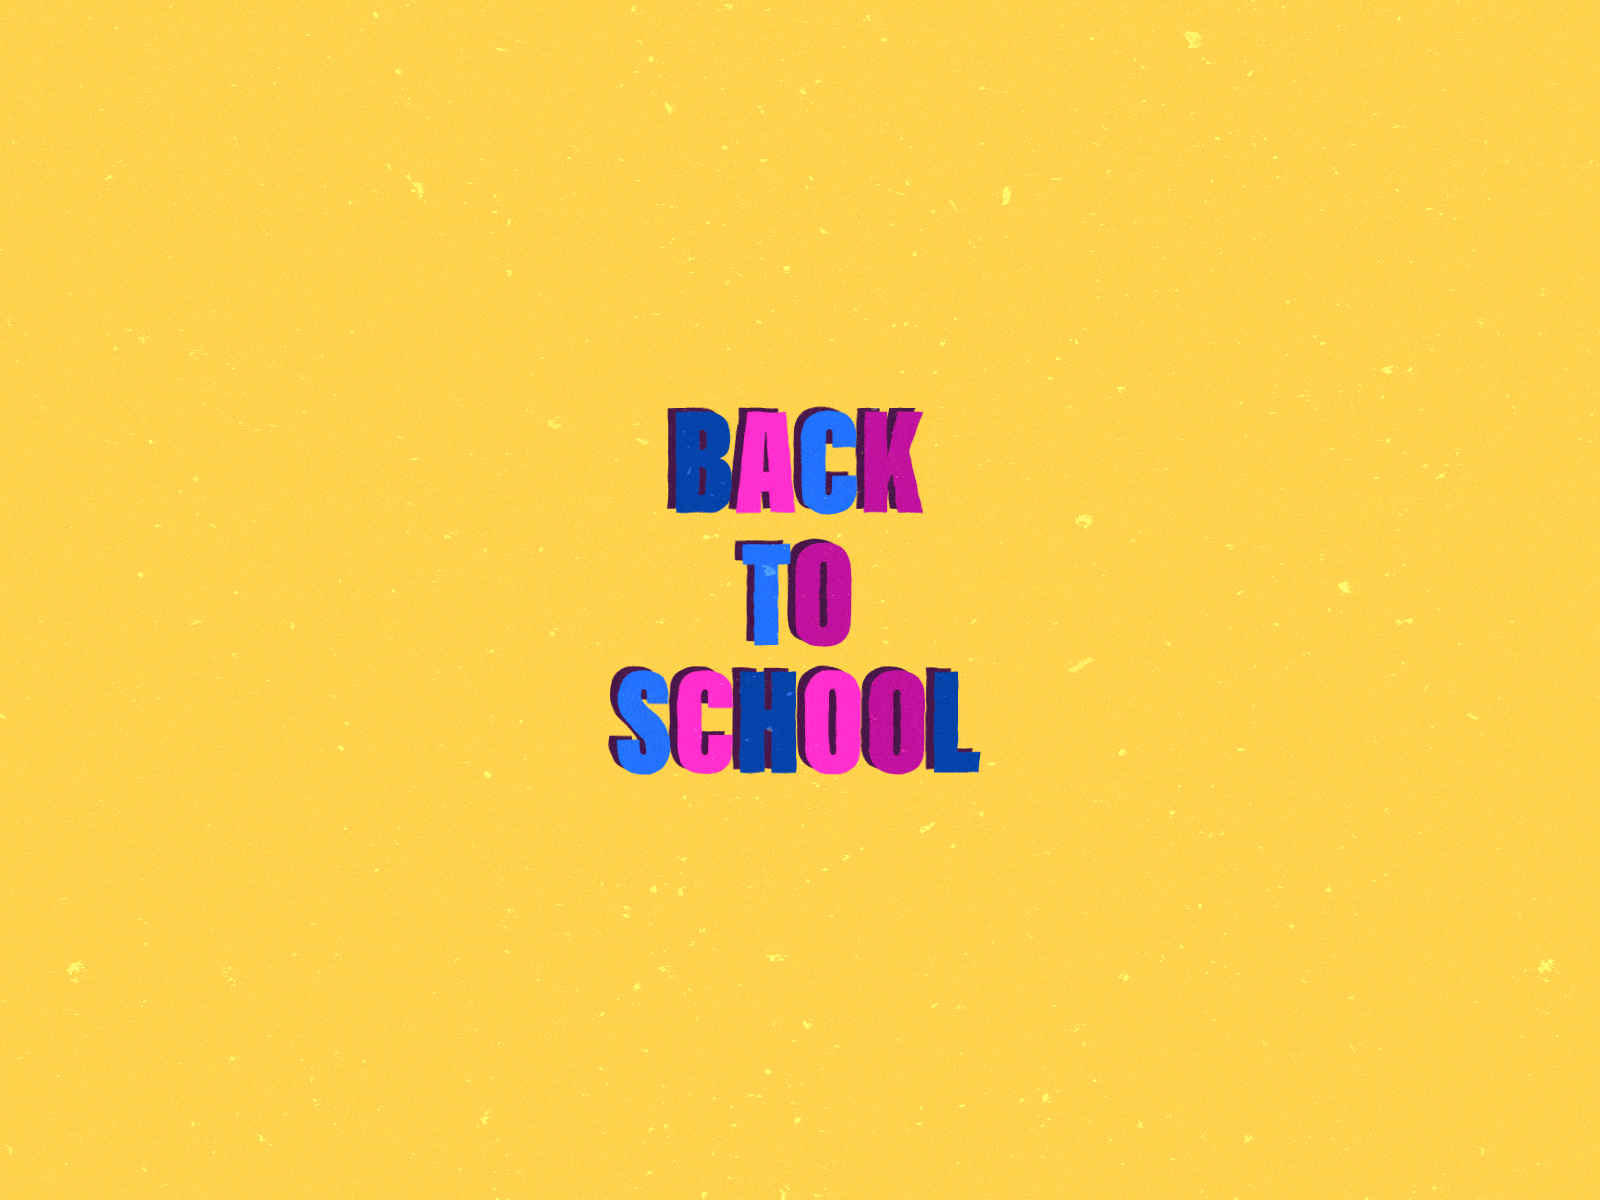 Back to School or Work?